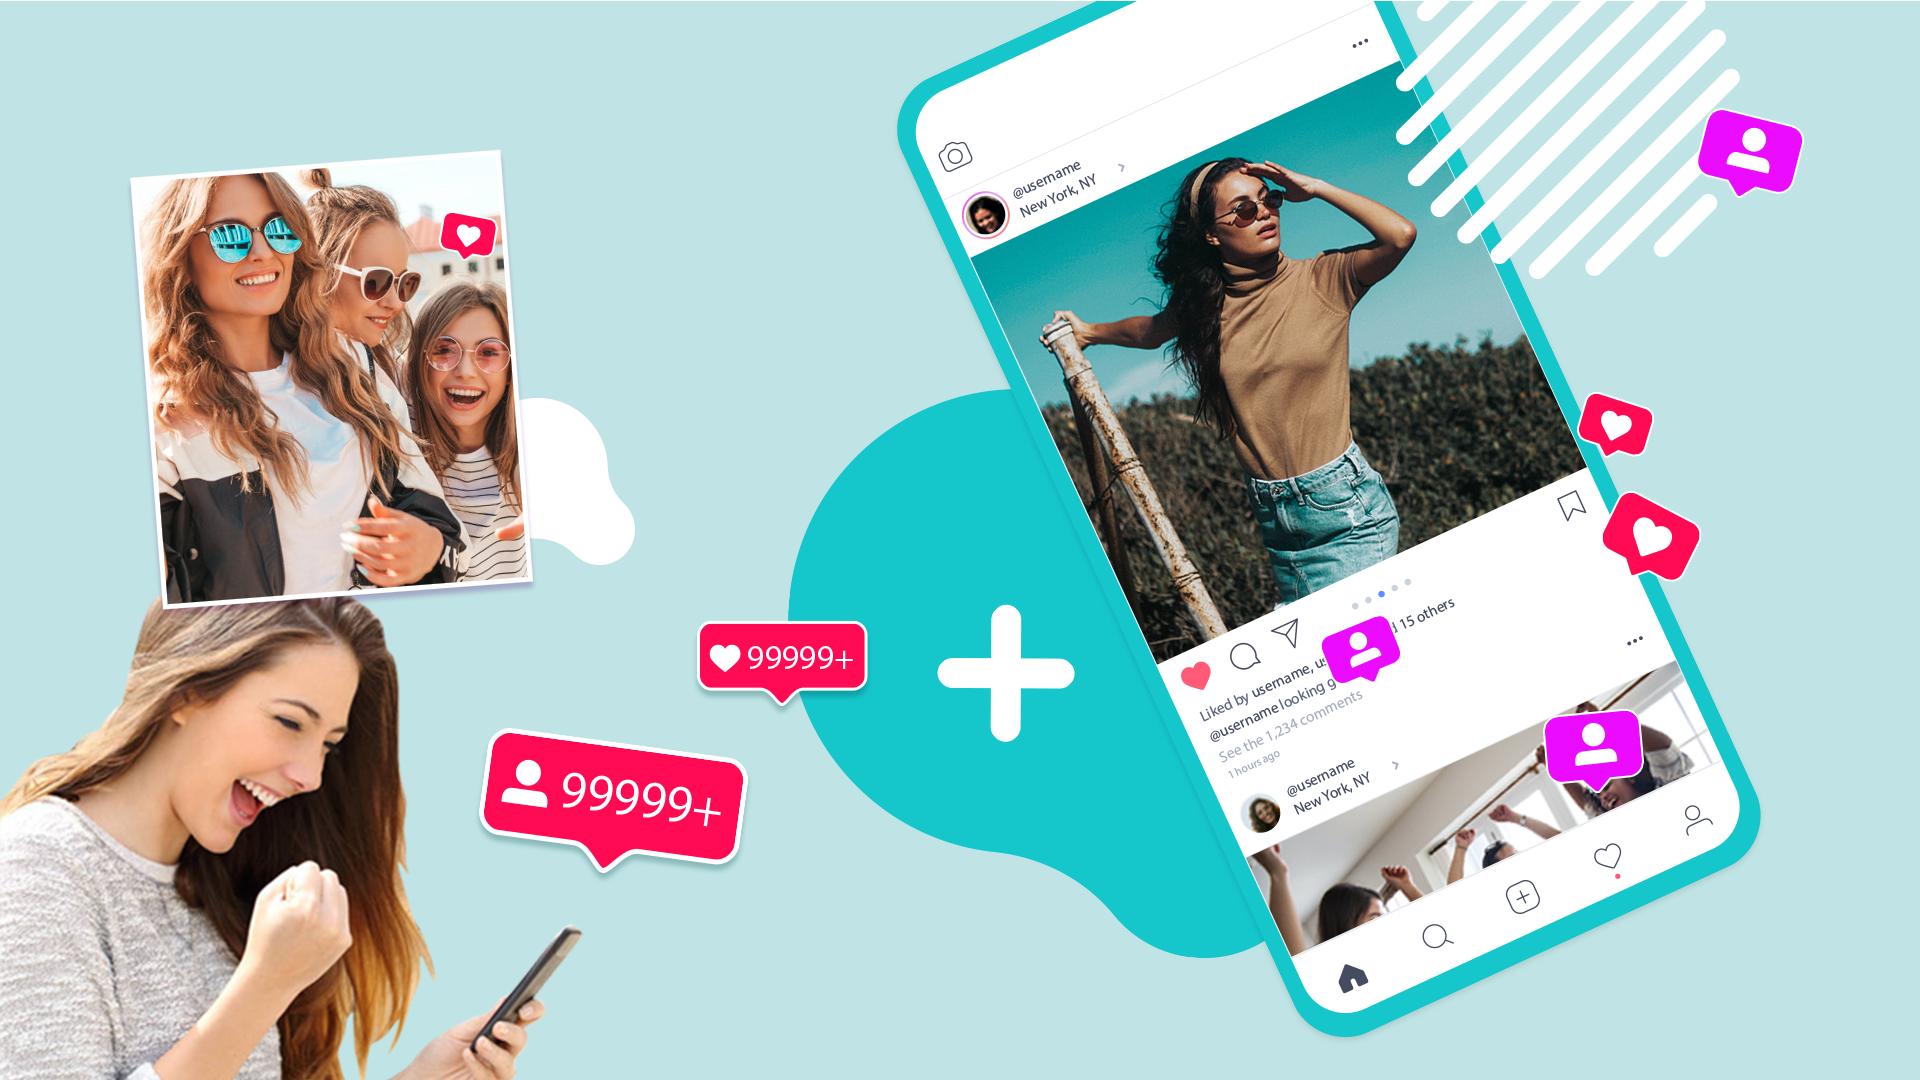 What are the services associated with buy followers on Instagram?